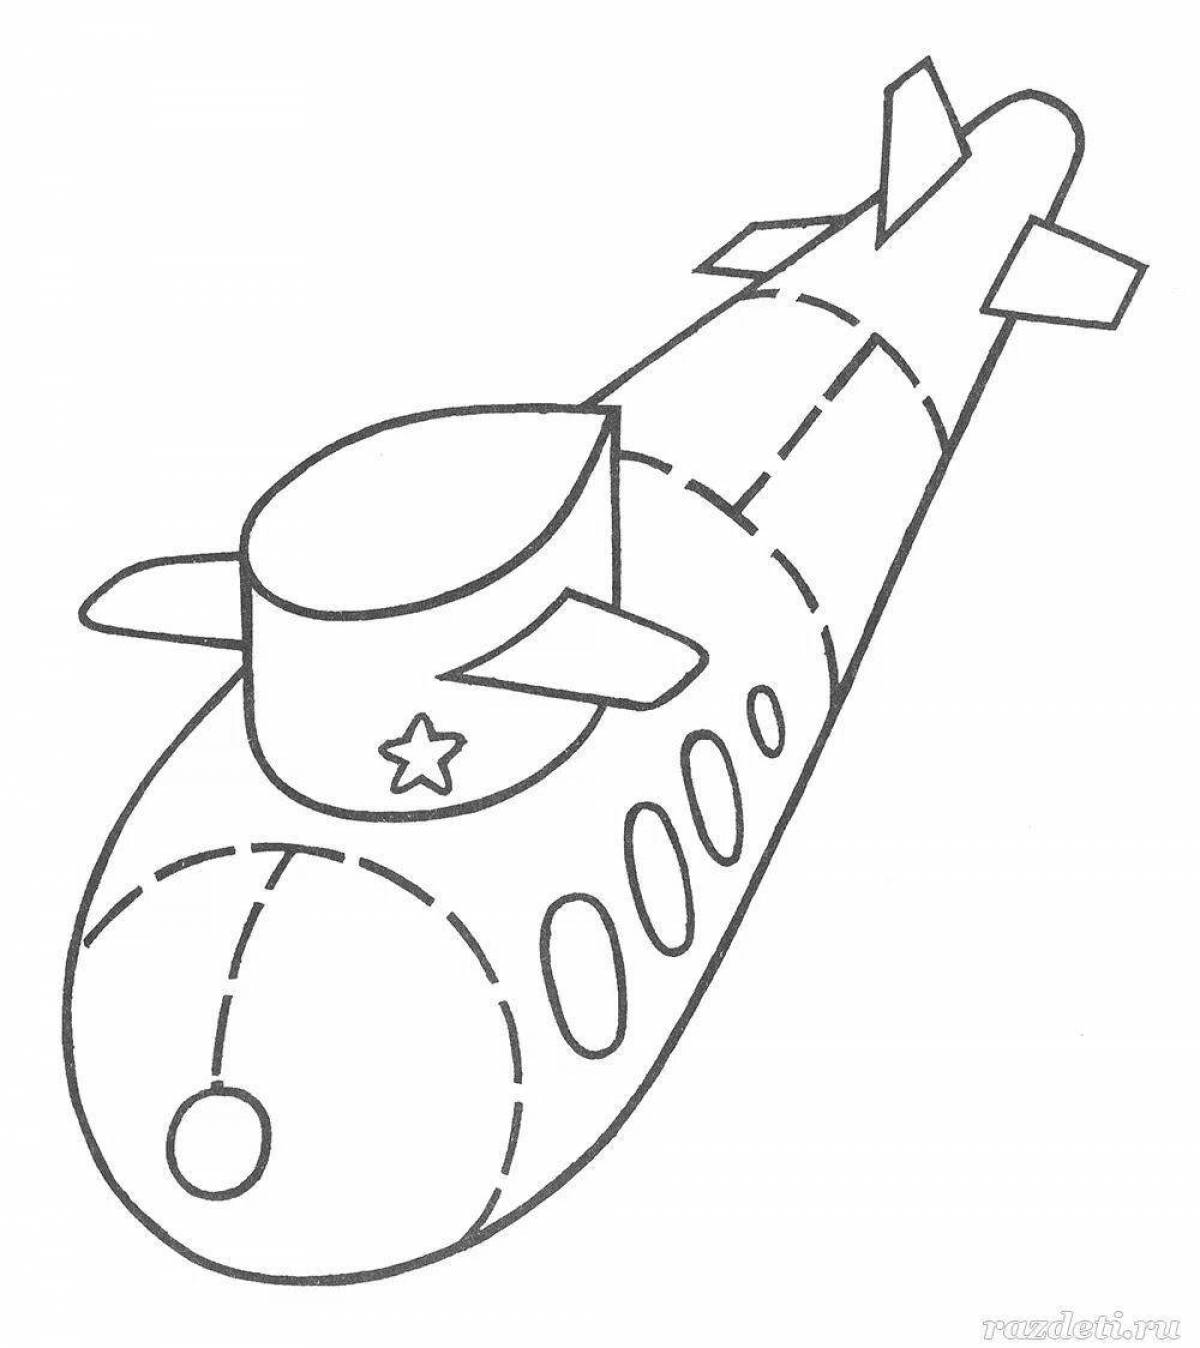 Incredible military vehicle coloring book for preschoolers